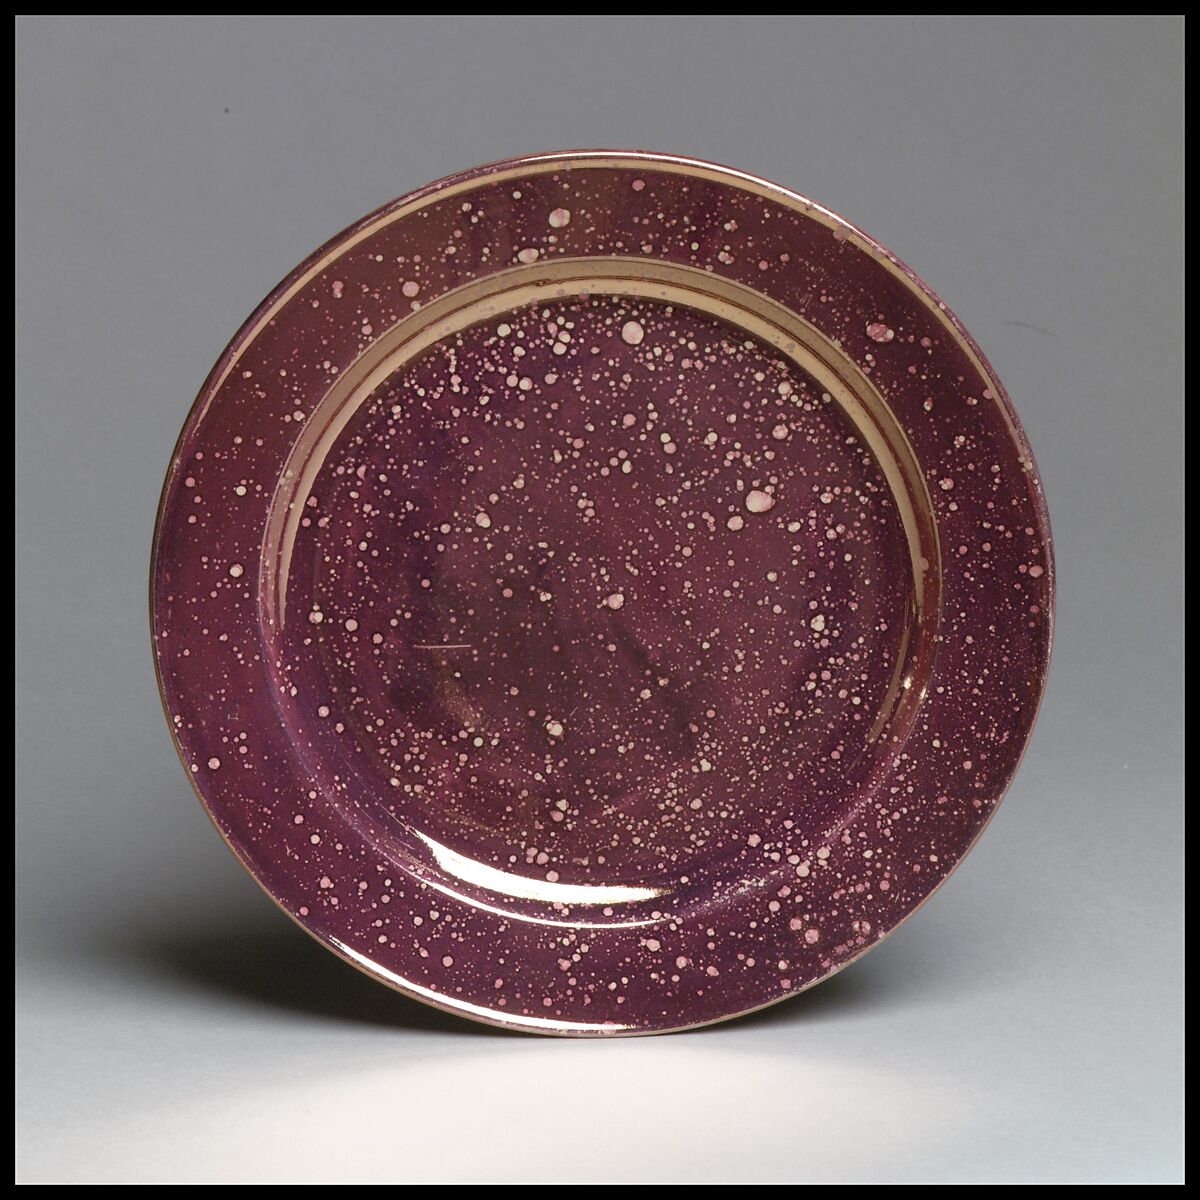 Plate (part of a set), Lustreware, French, Sarreguemines 